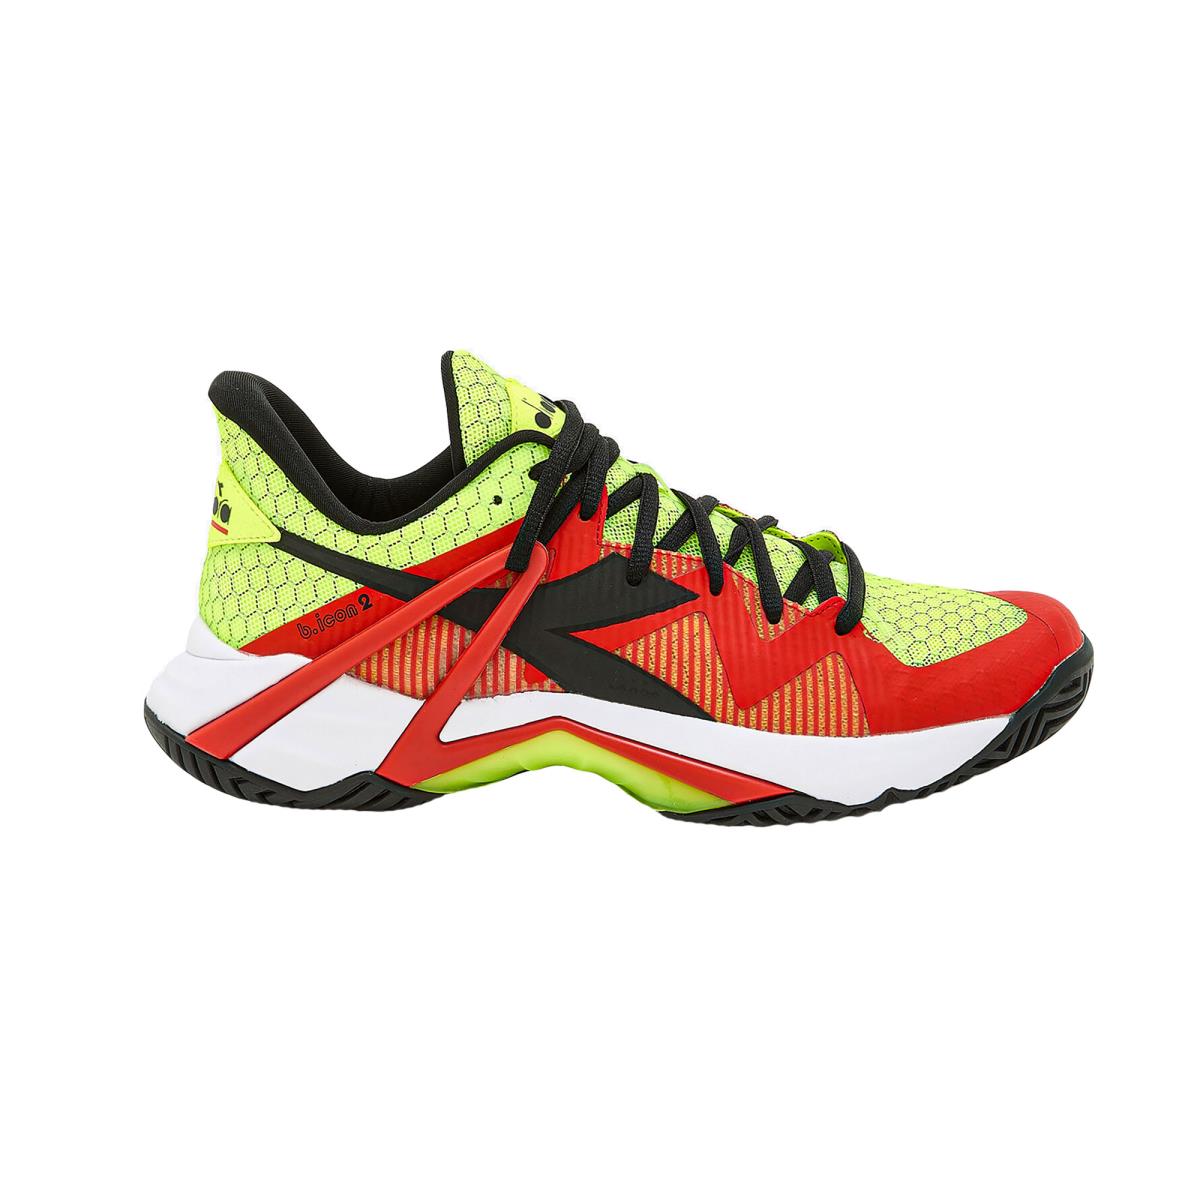 Diadora B.icon 2 All Ground Mens Tennis Shoes Yellow/Blk/Red